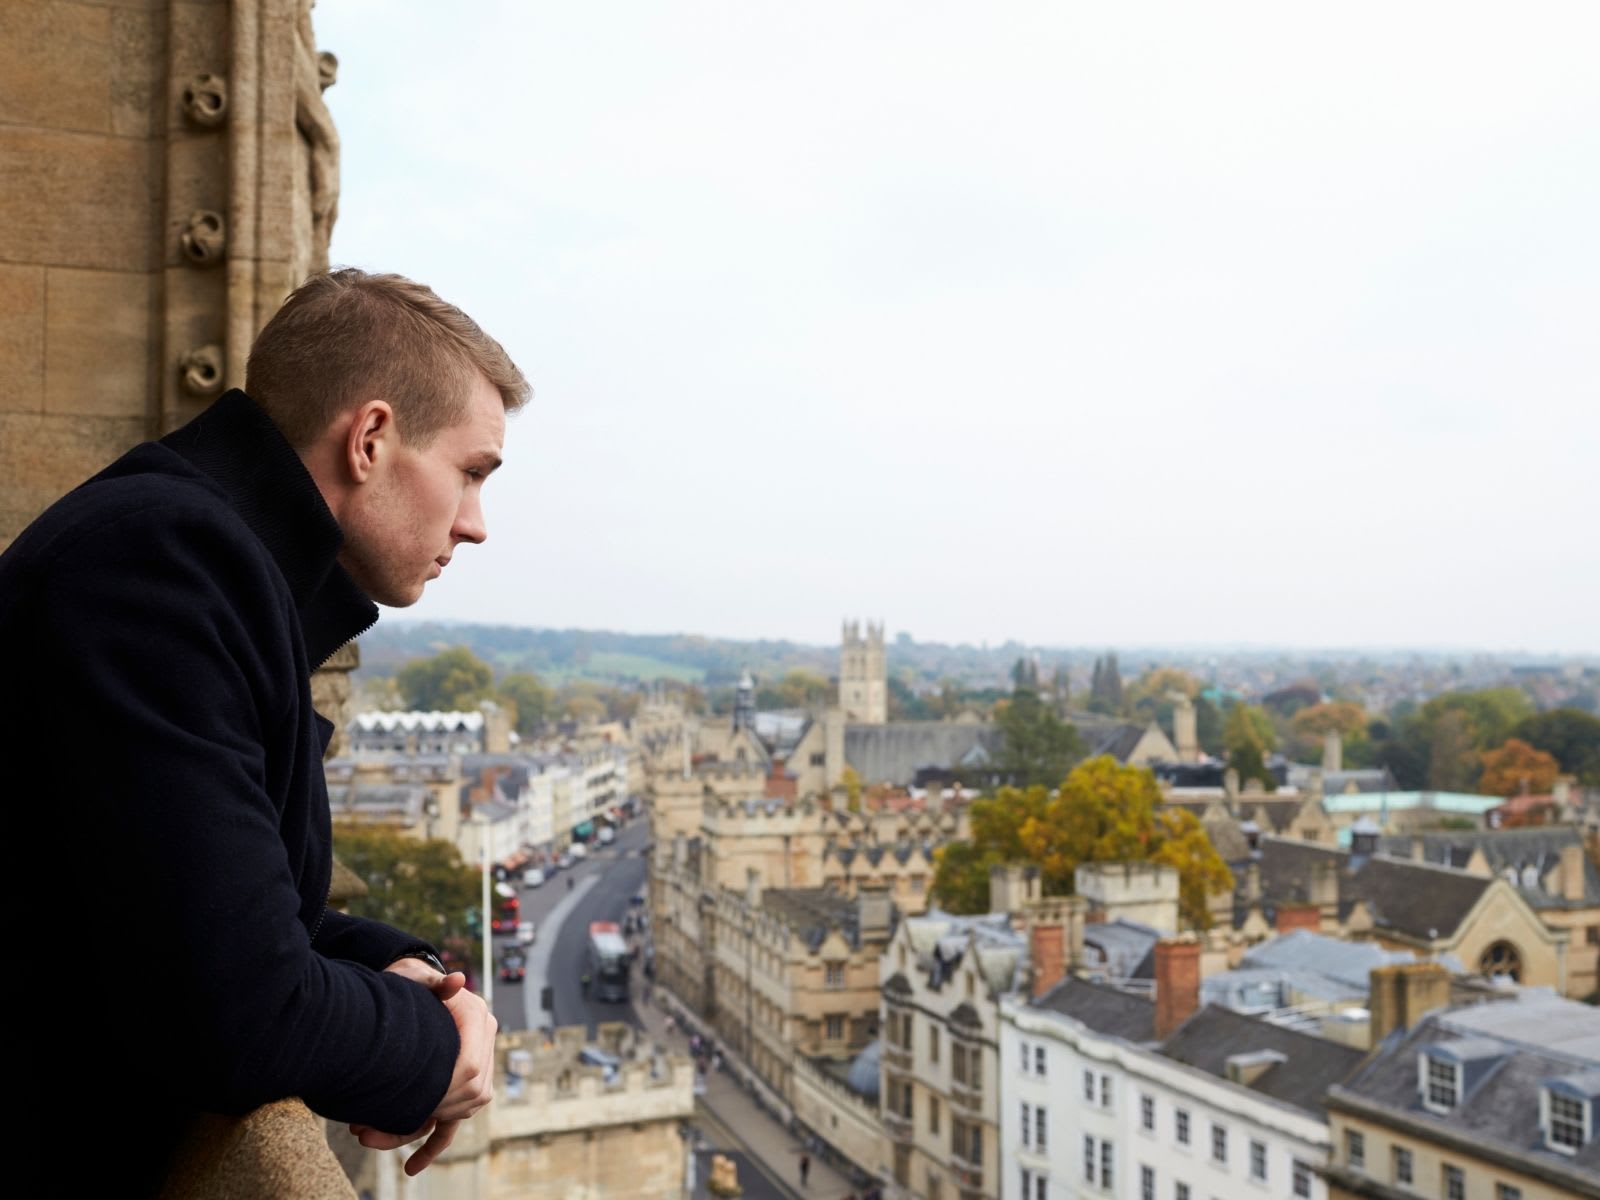 Male tourist looking out at Oxford